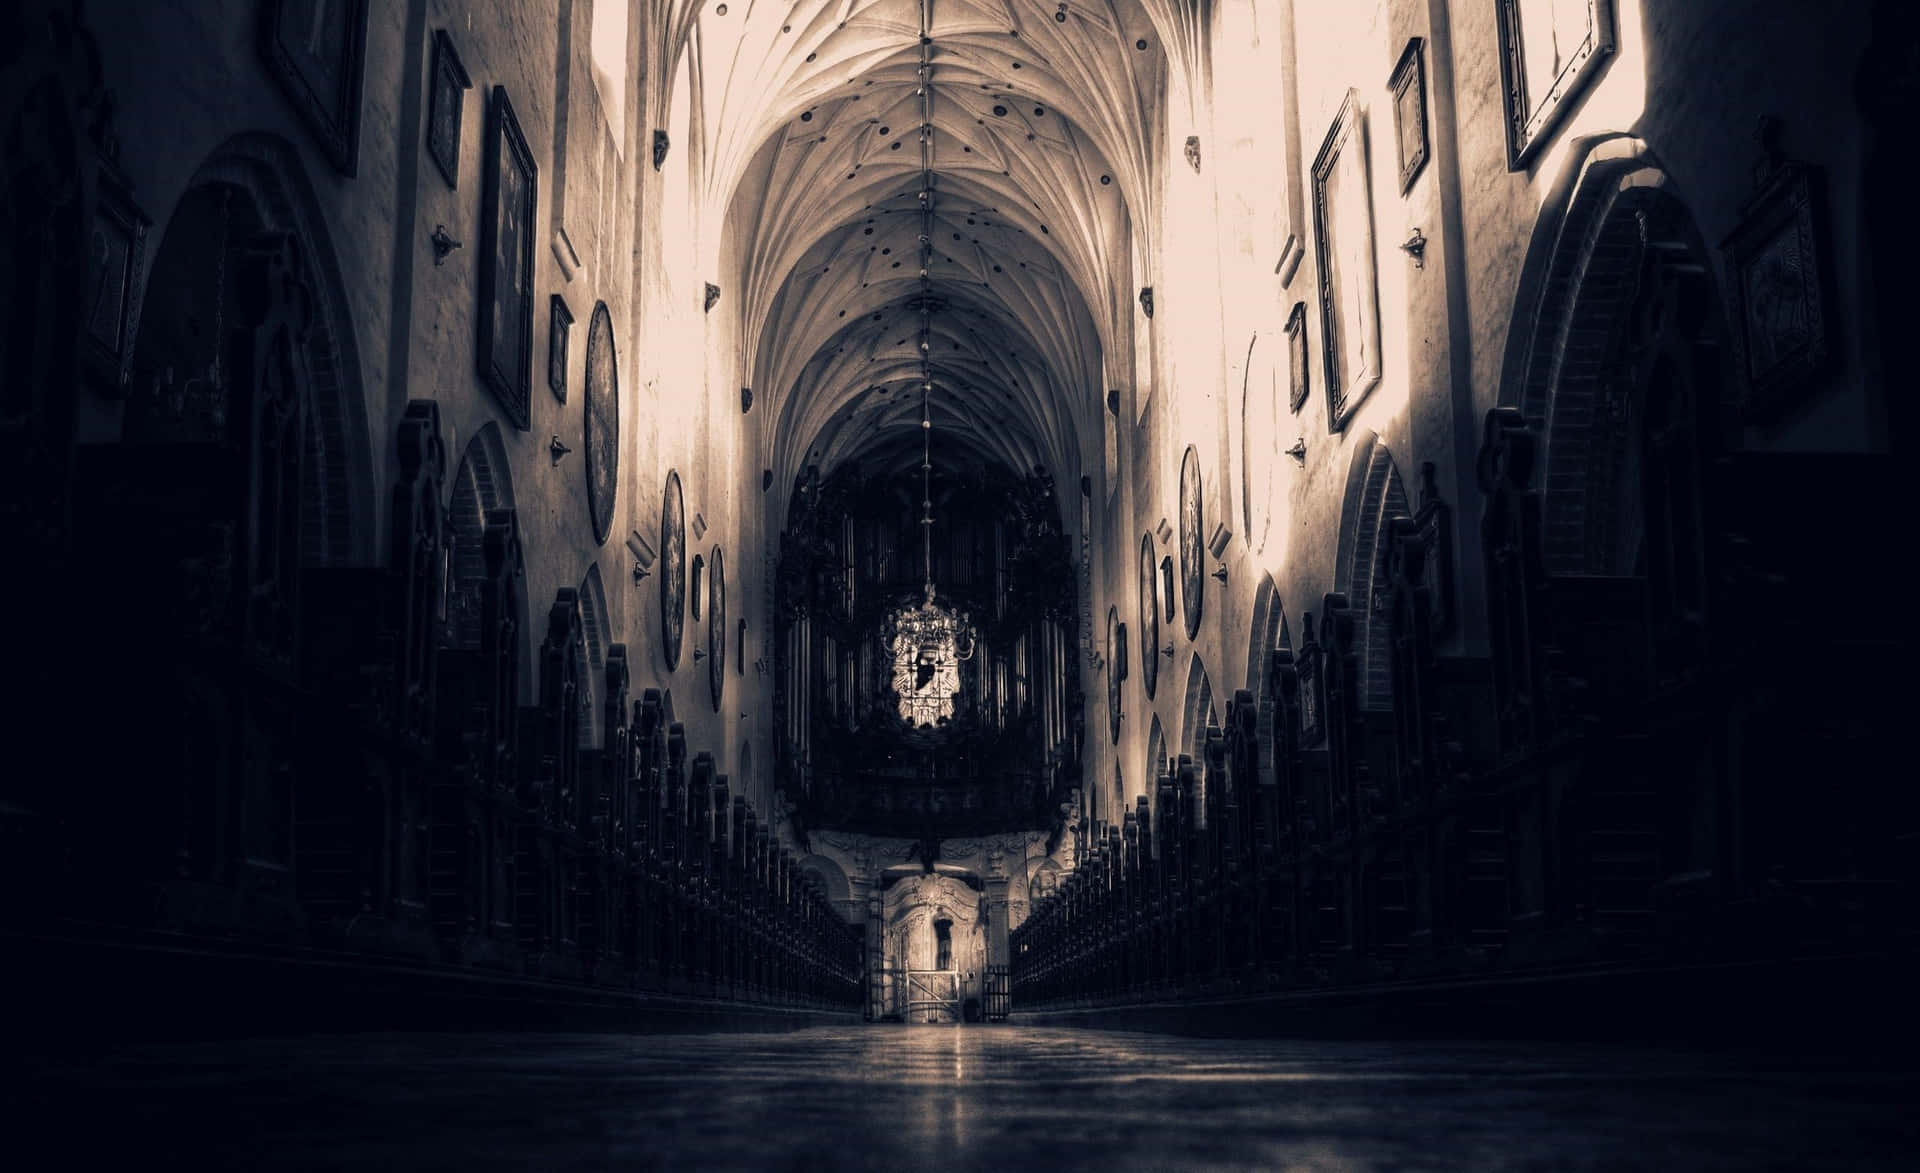 Gothic Cathedral Interior_ Gloomy Aesthetic.jpg Wallpaper